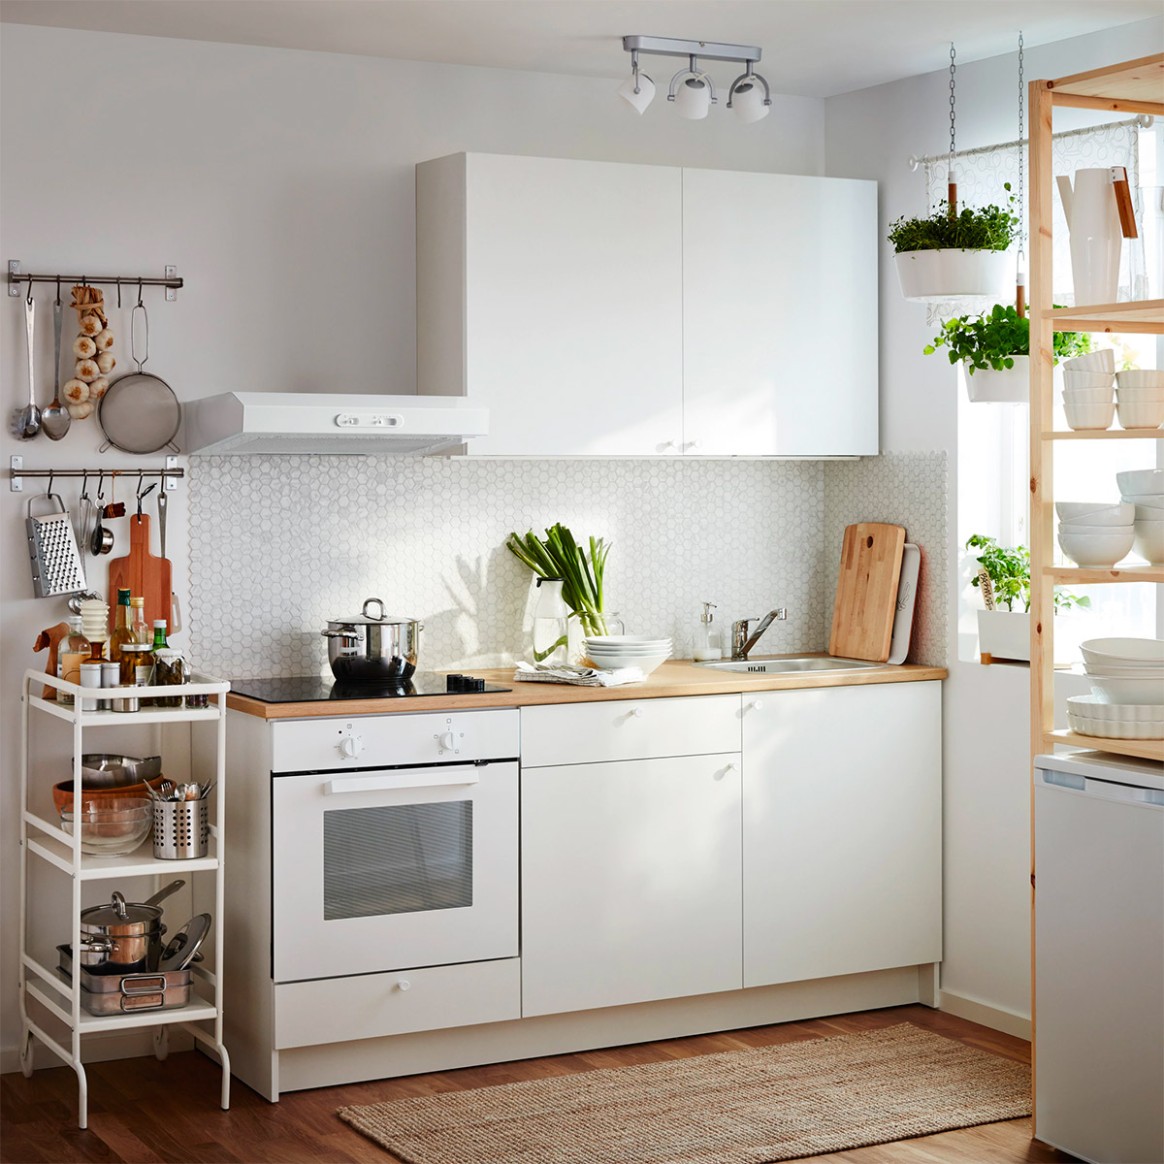 5 Splendid Small Kitchens And Ideas You Can Use From Them